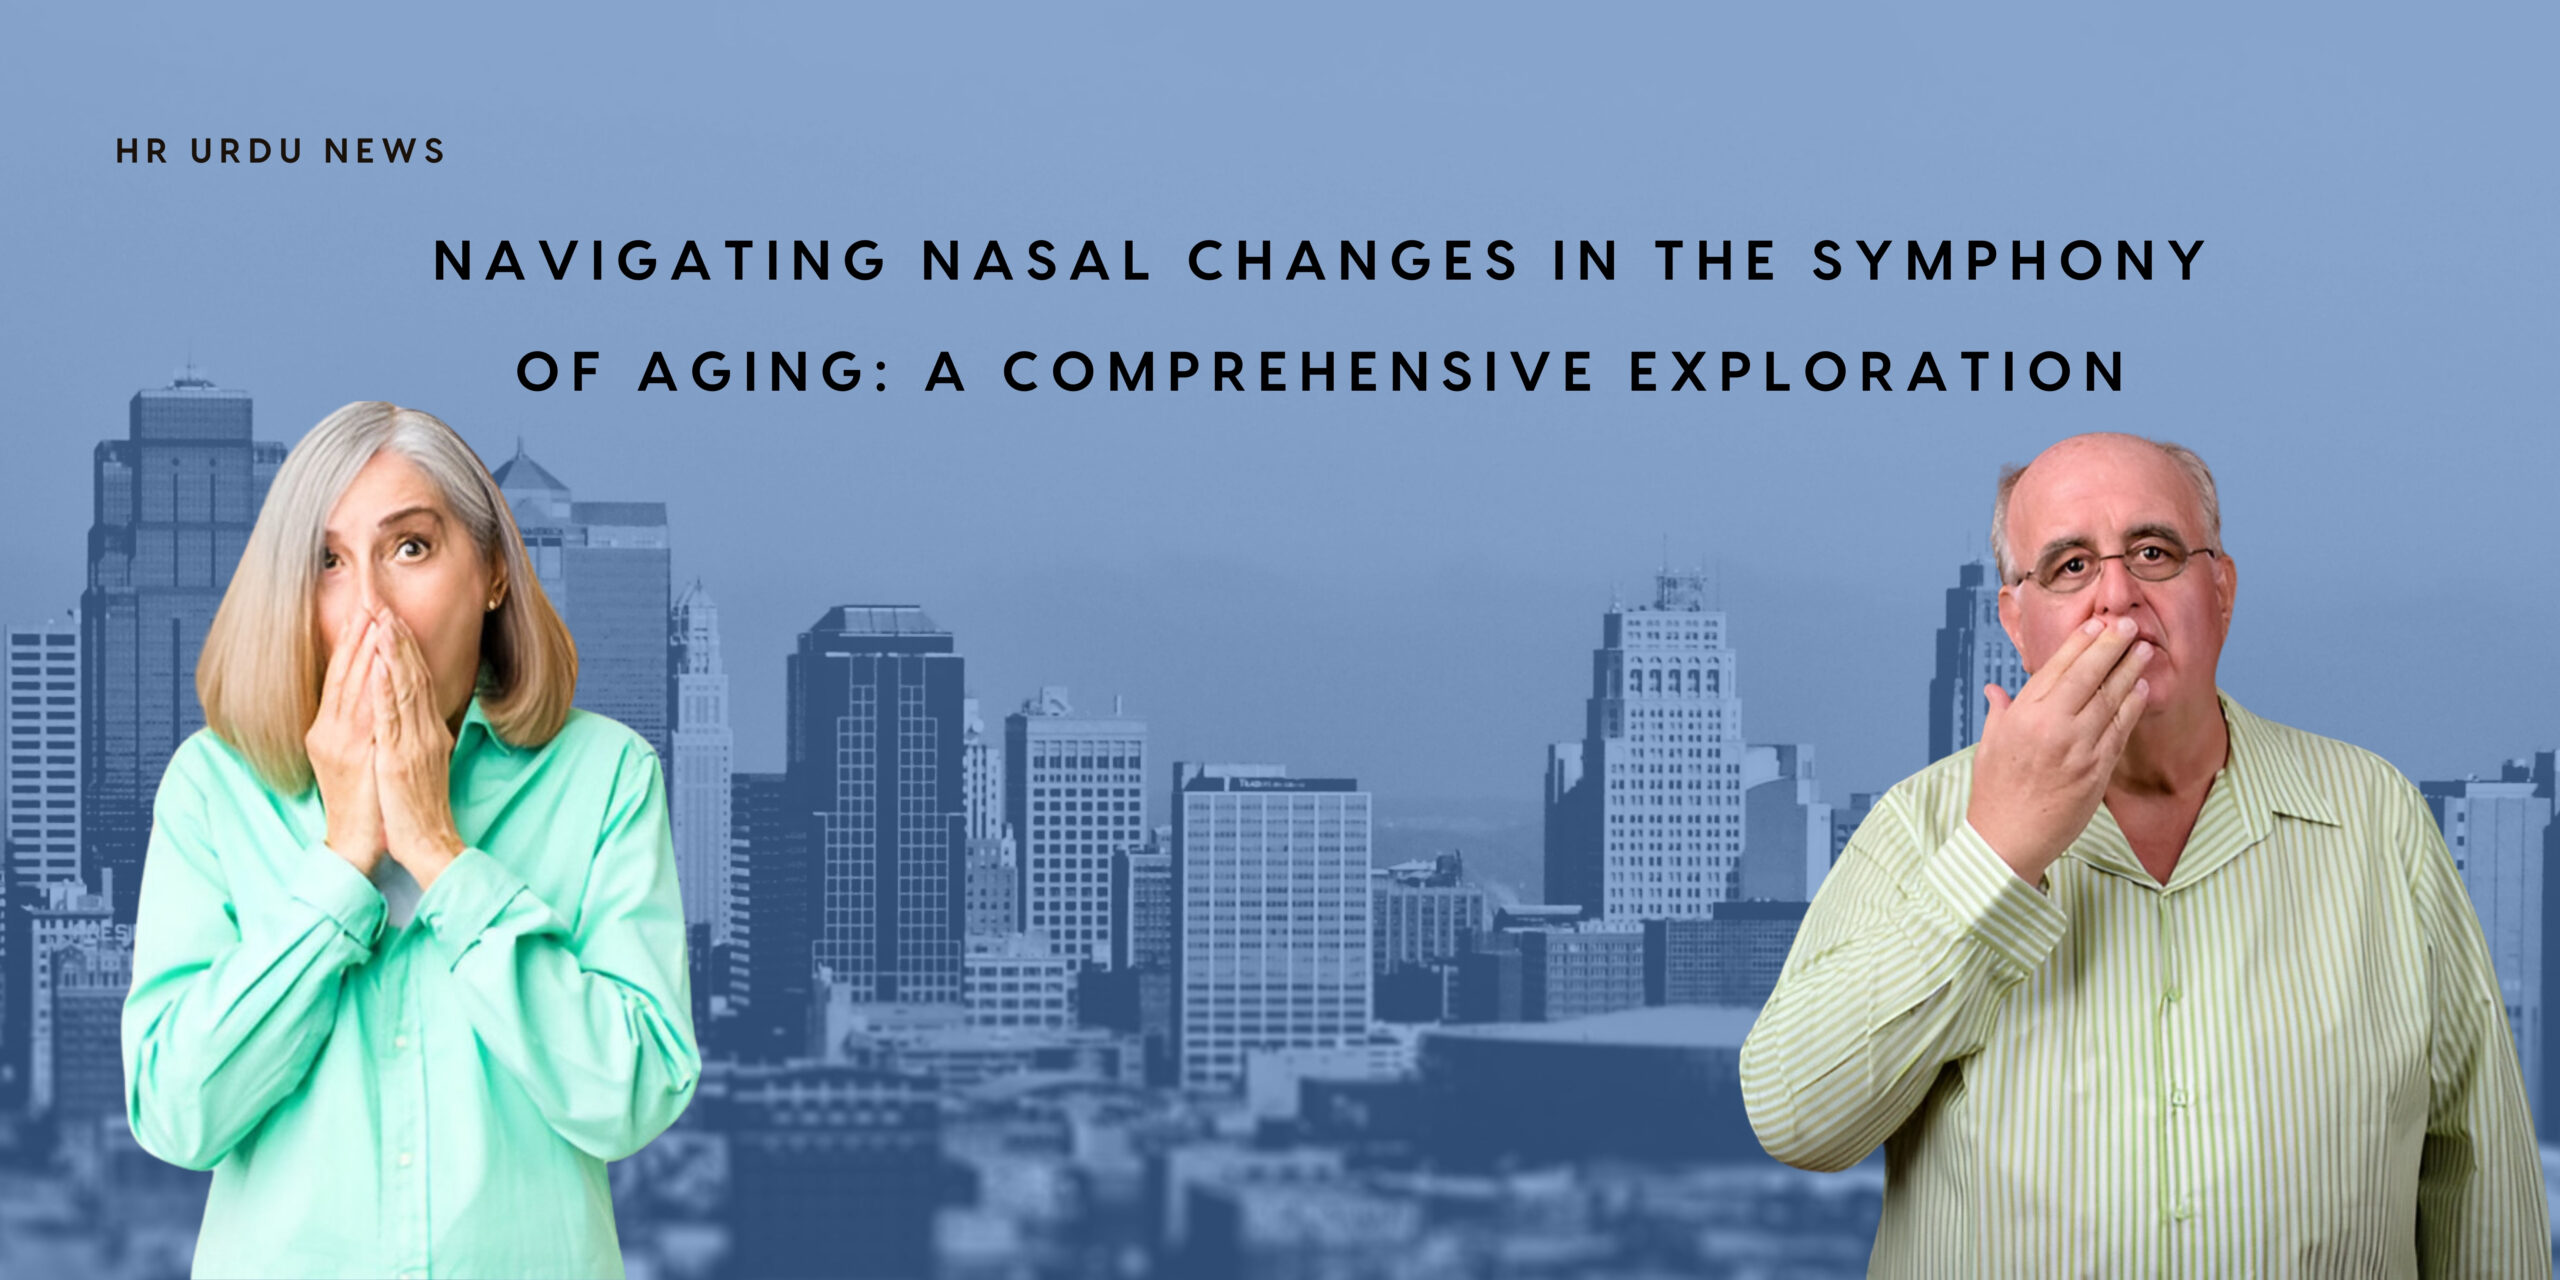 Navigating Nasal Changes in the Symphony of Aging: A Comprehensive Exploration